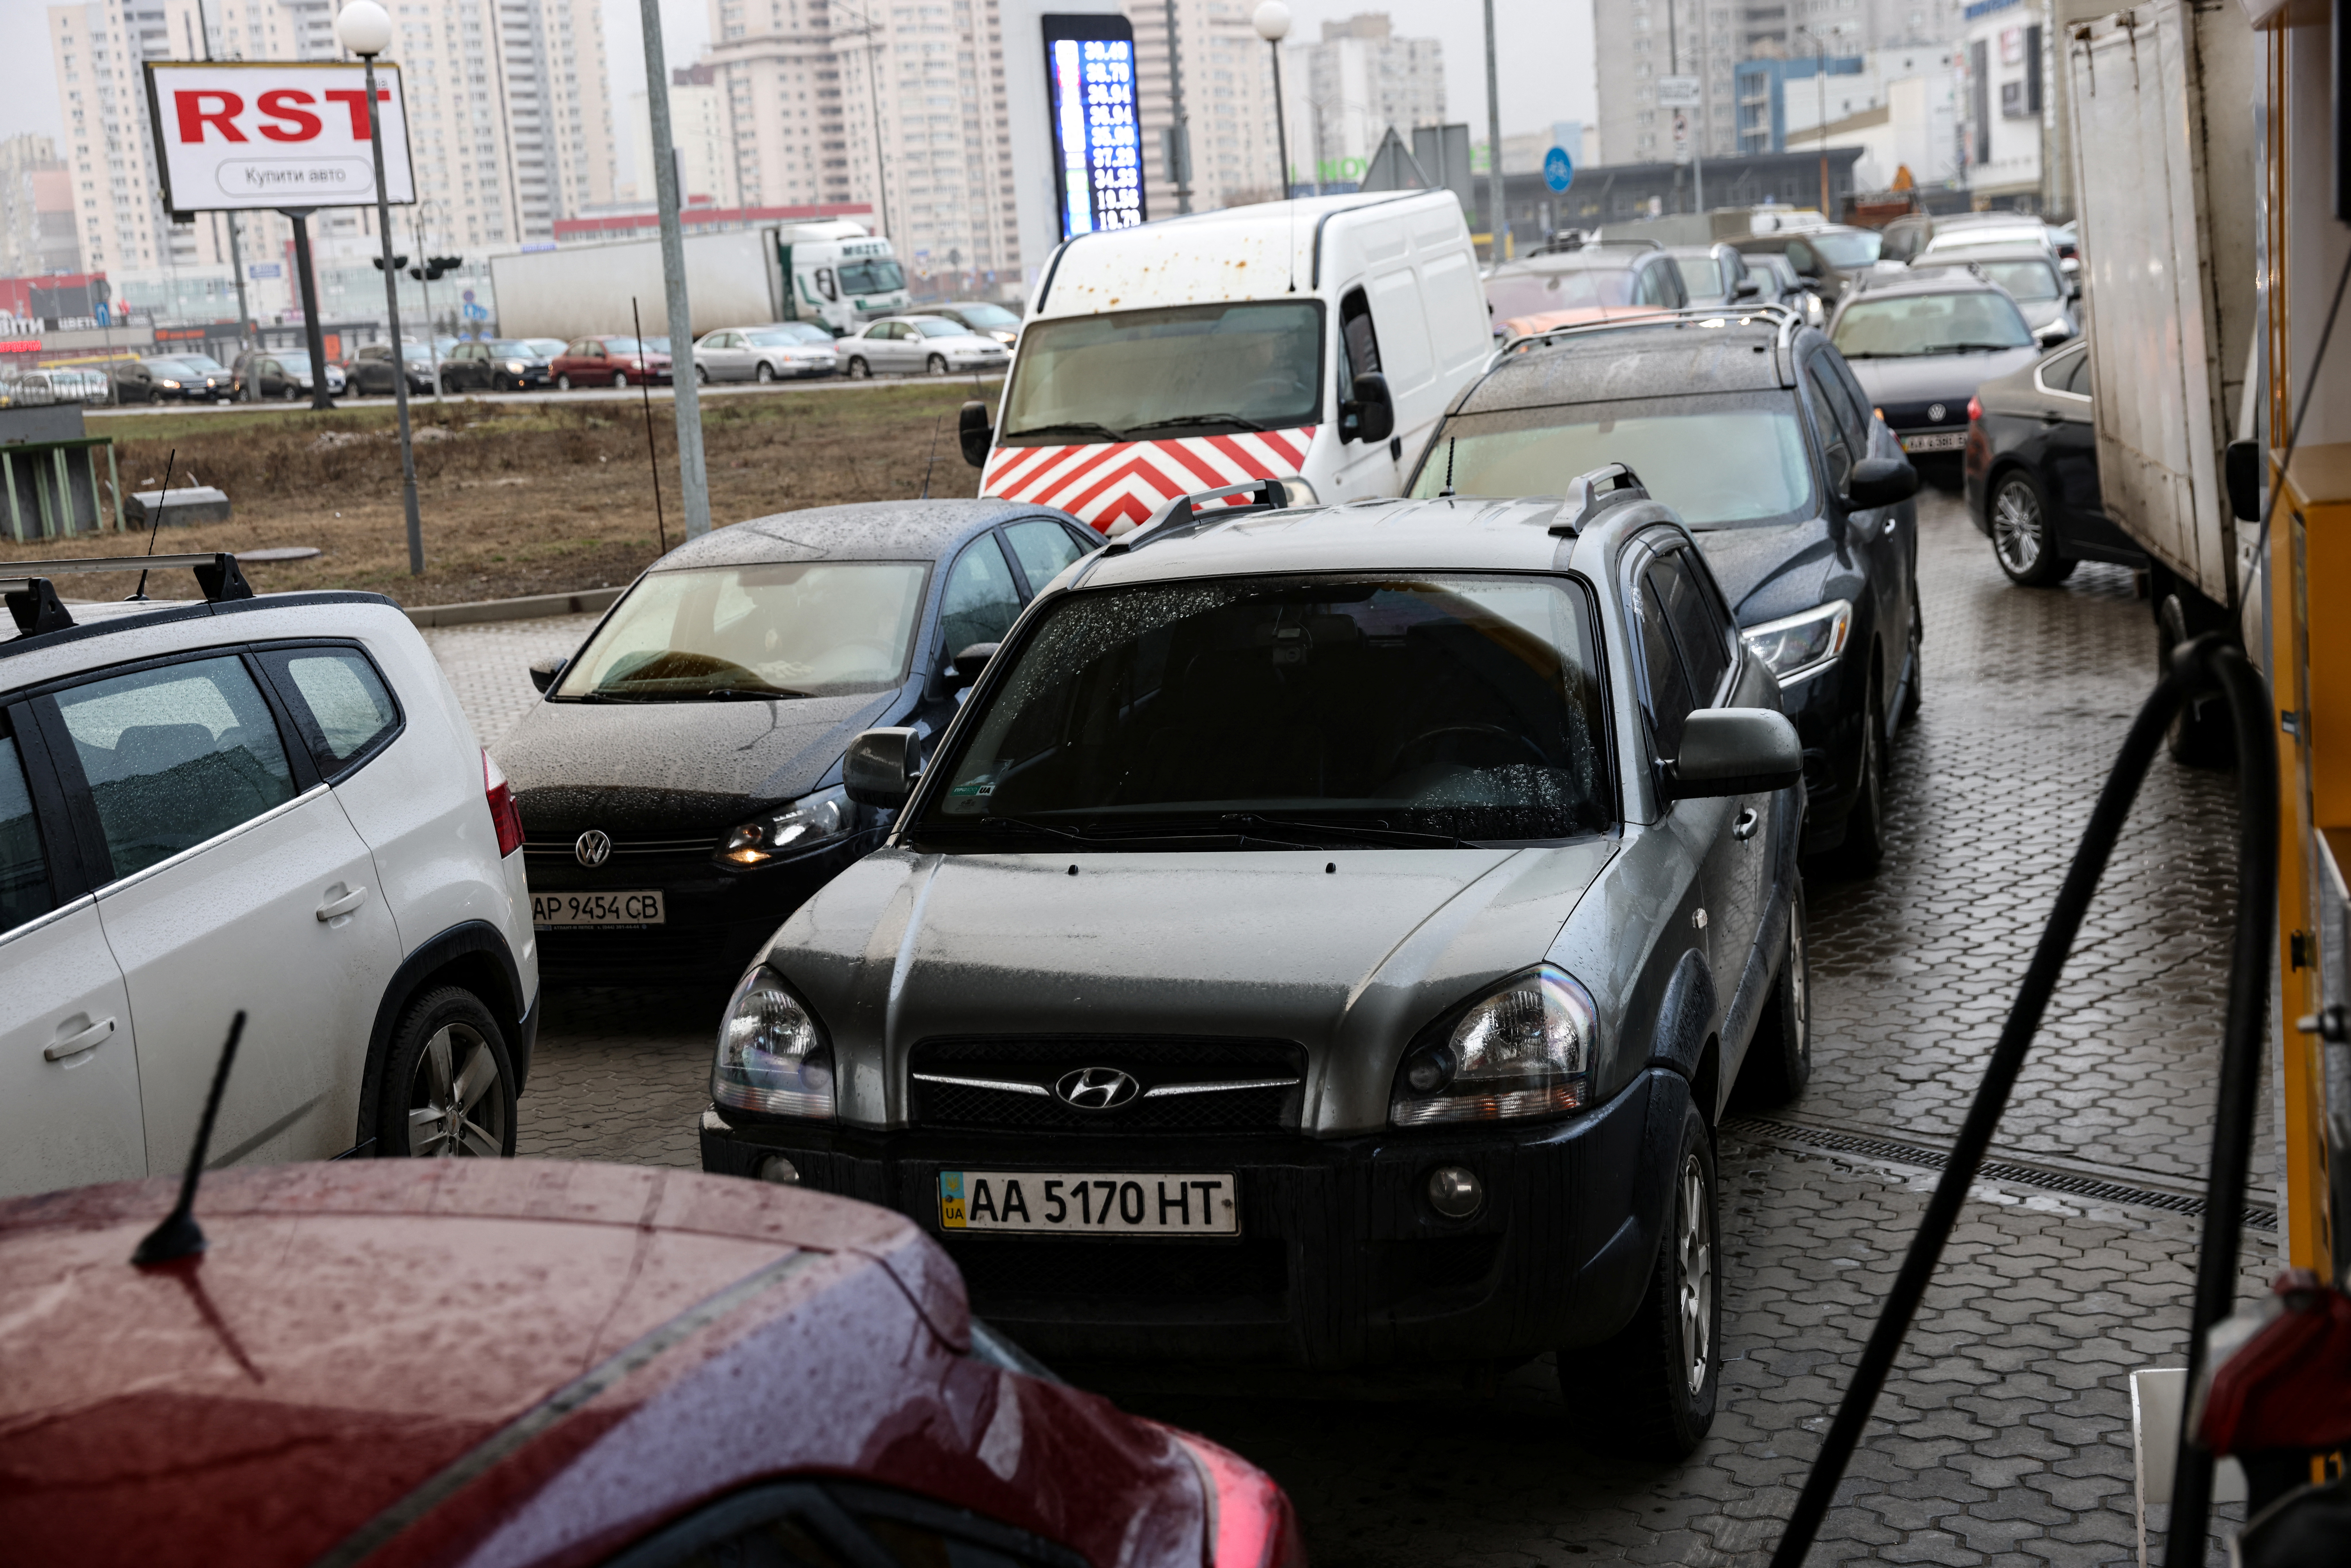 Cars queue at a gas station in Kyiv